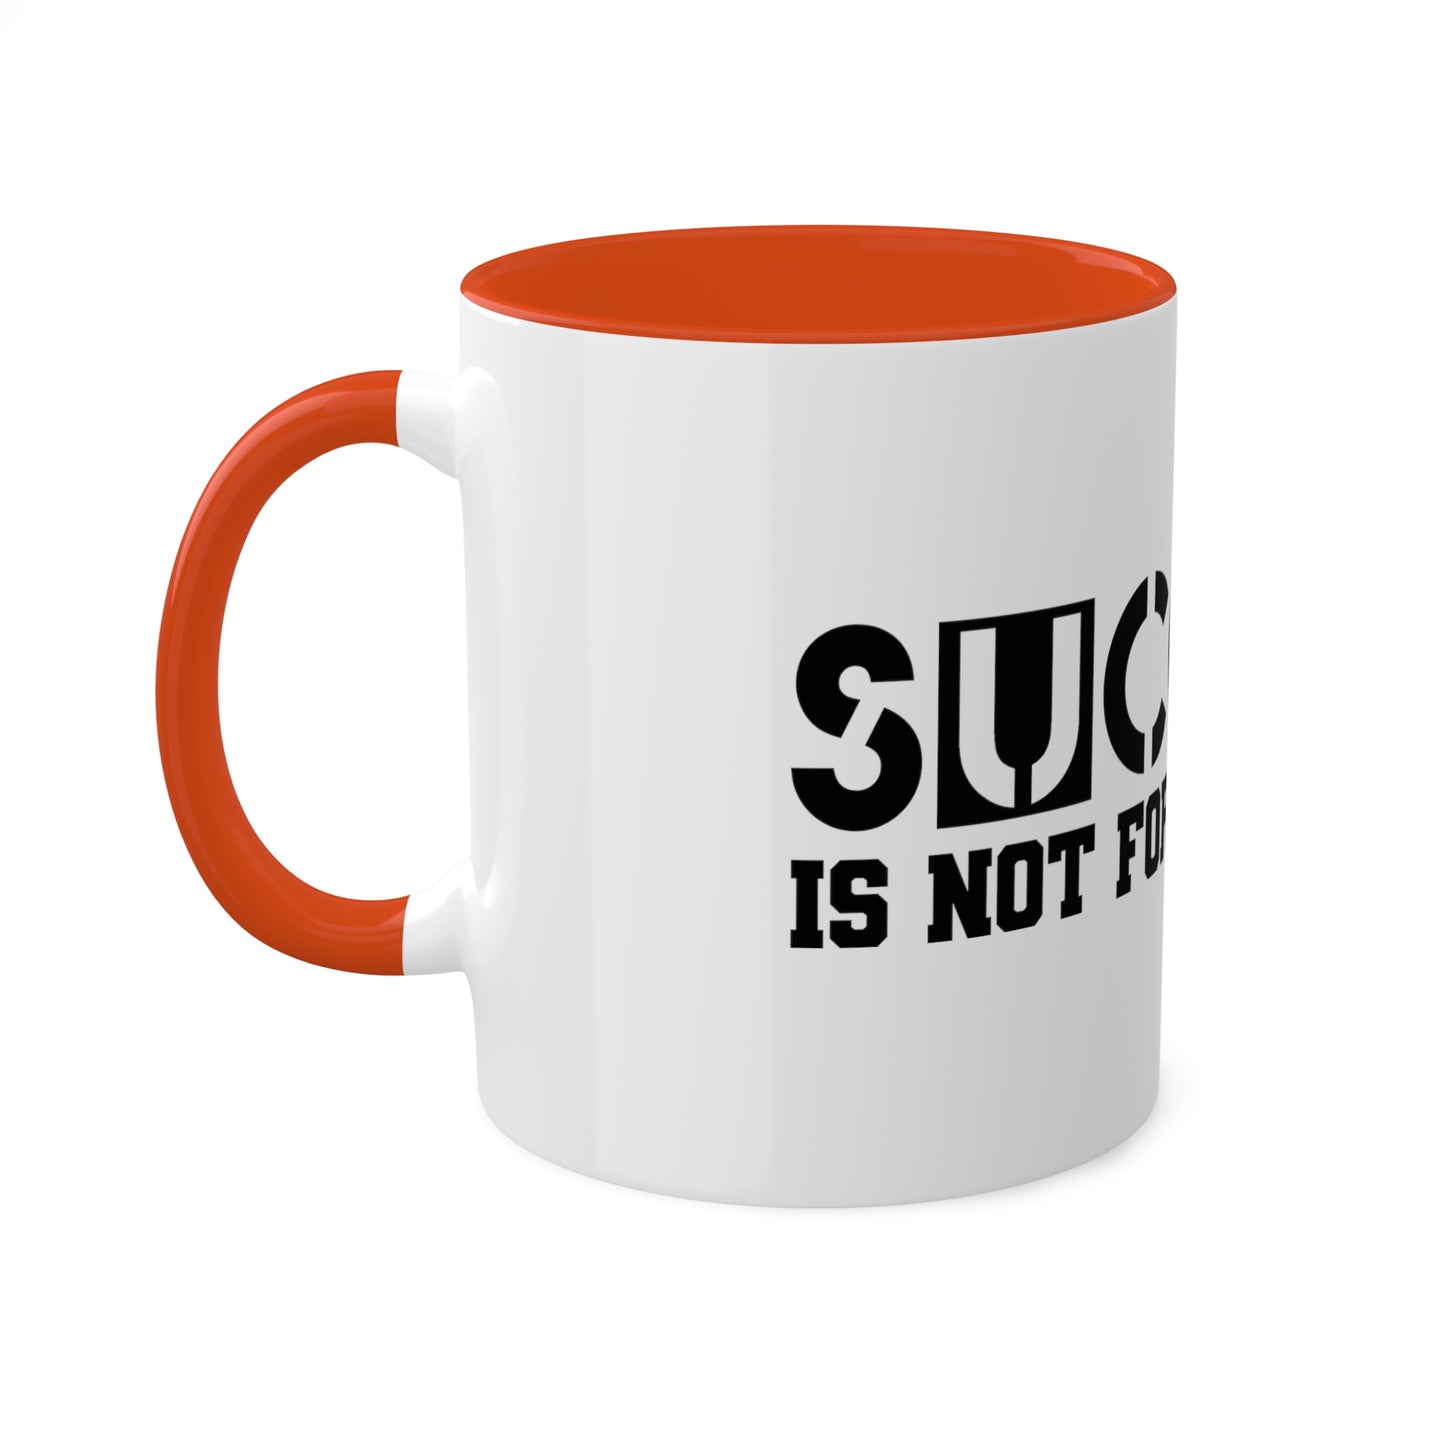 Success Is Not For The Weak Mug, 11oz